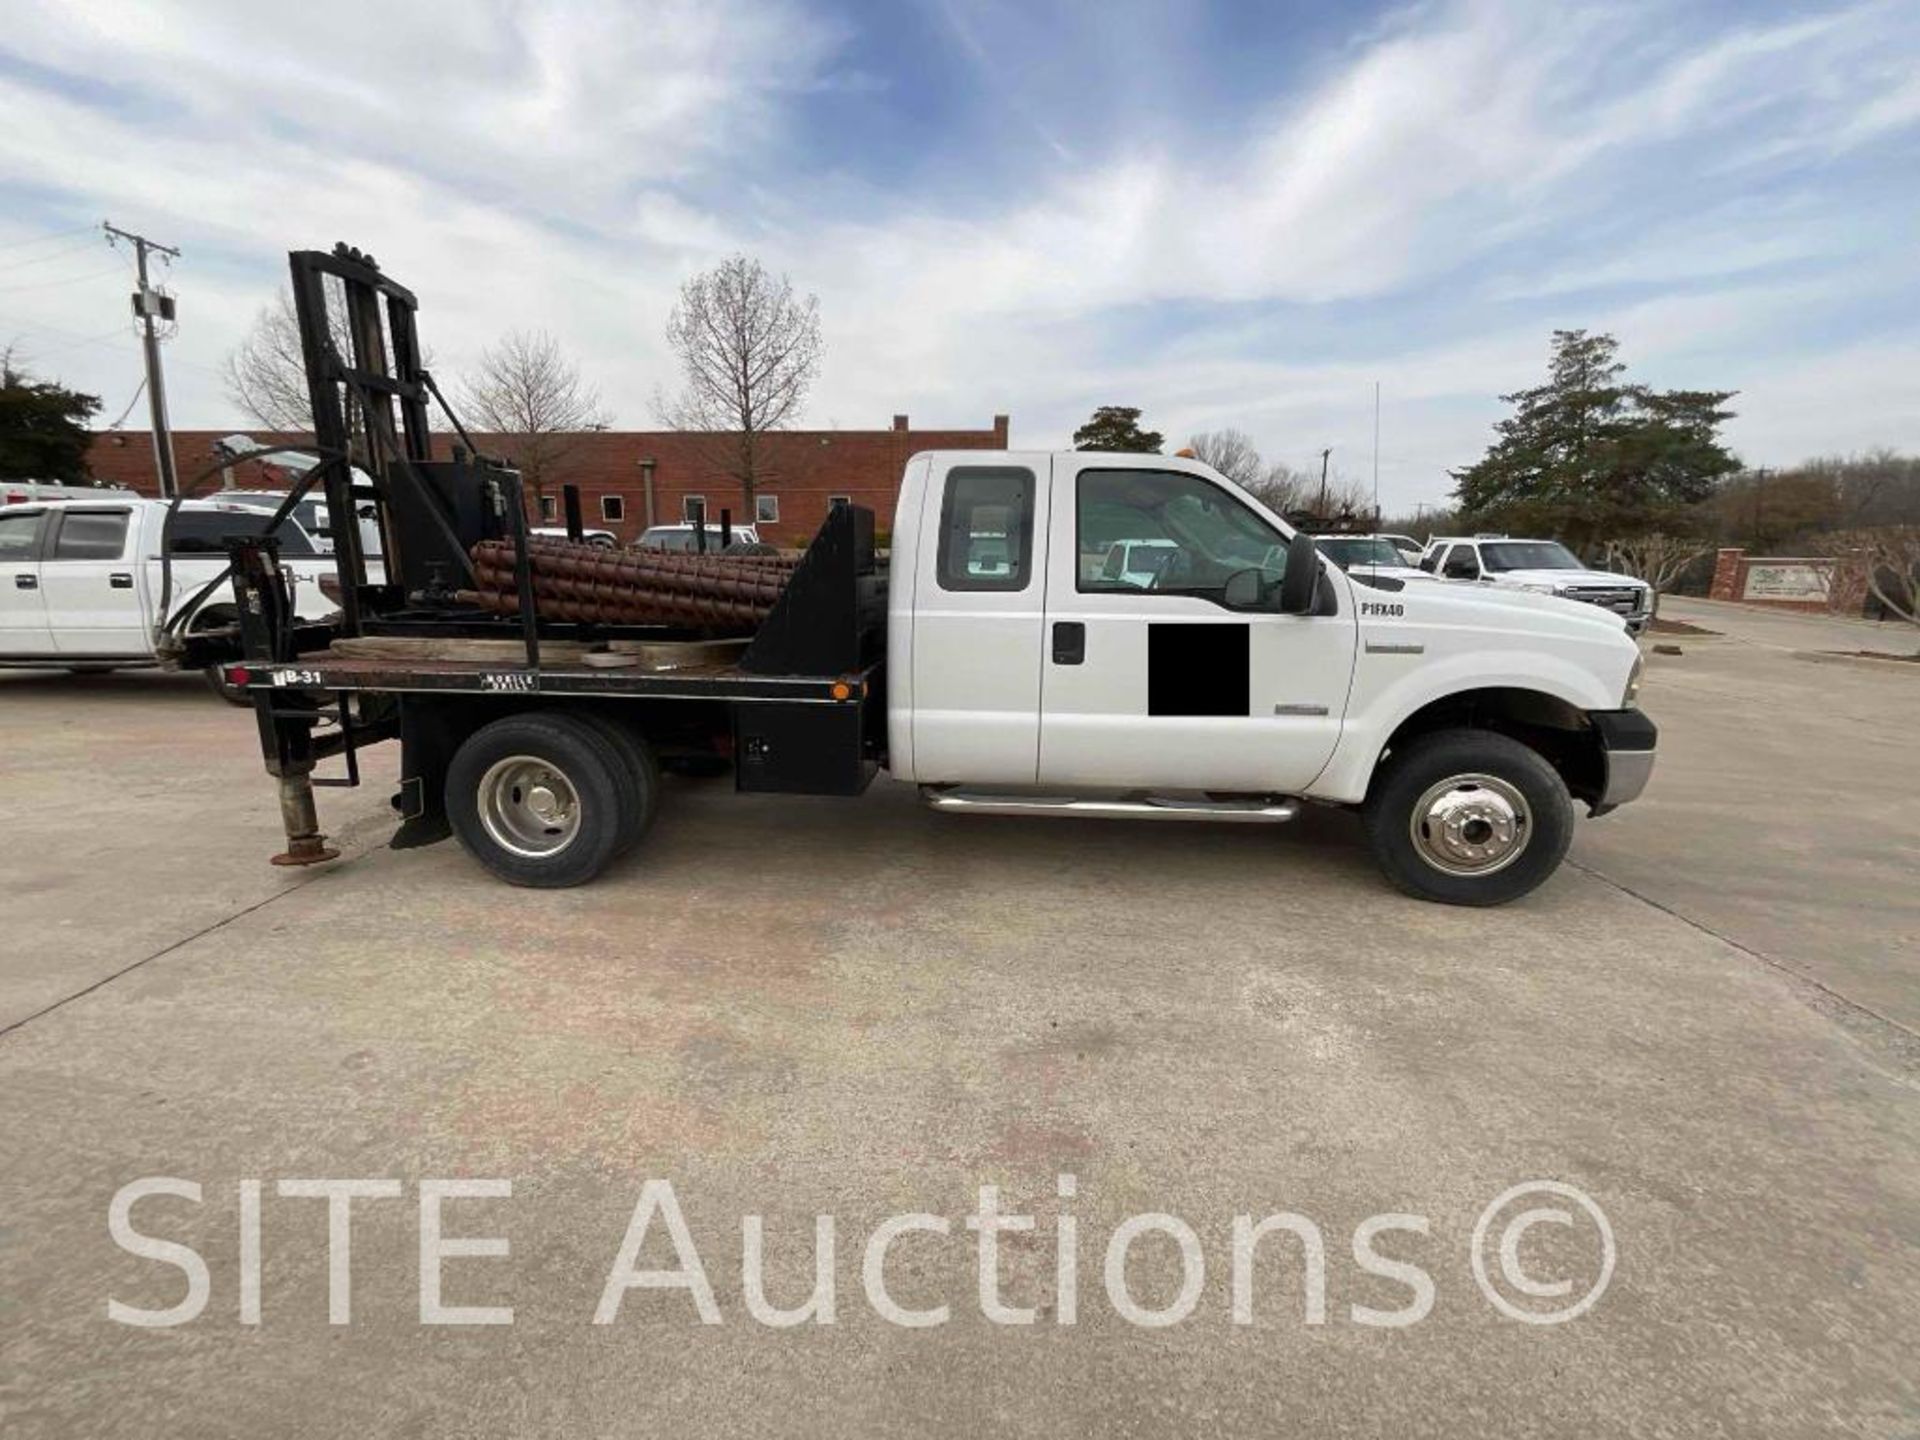 2006 Ford F250 SD Extended Cab Drill Rig Truck